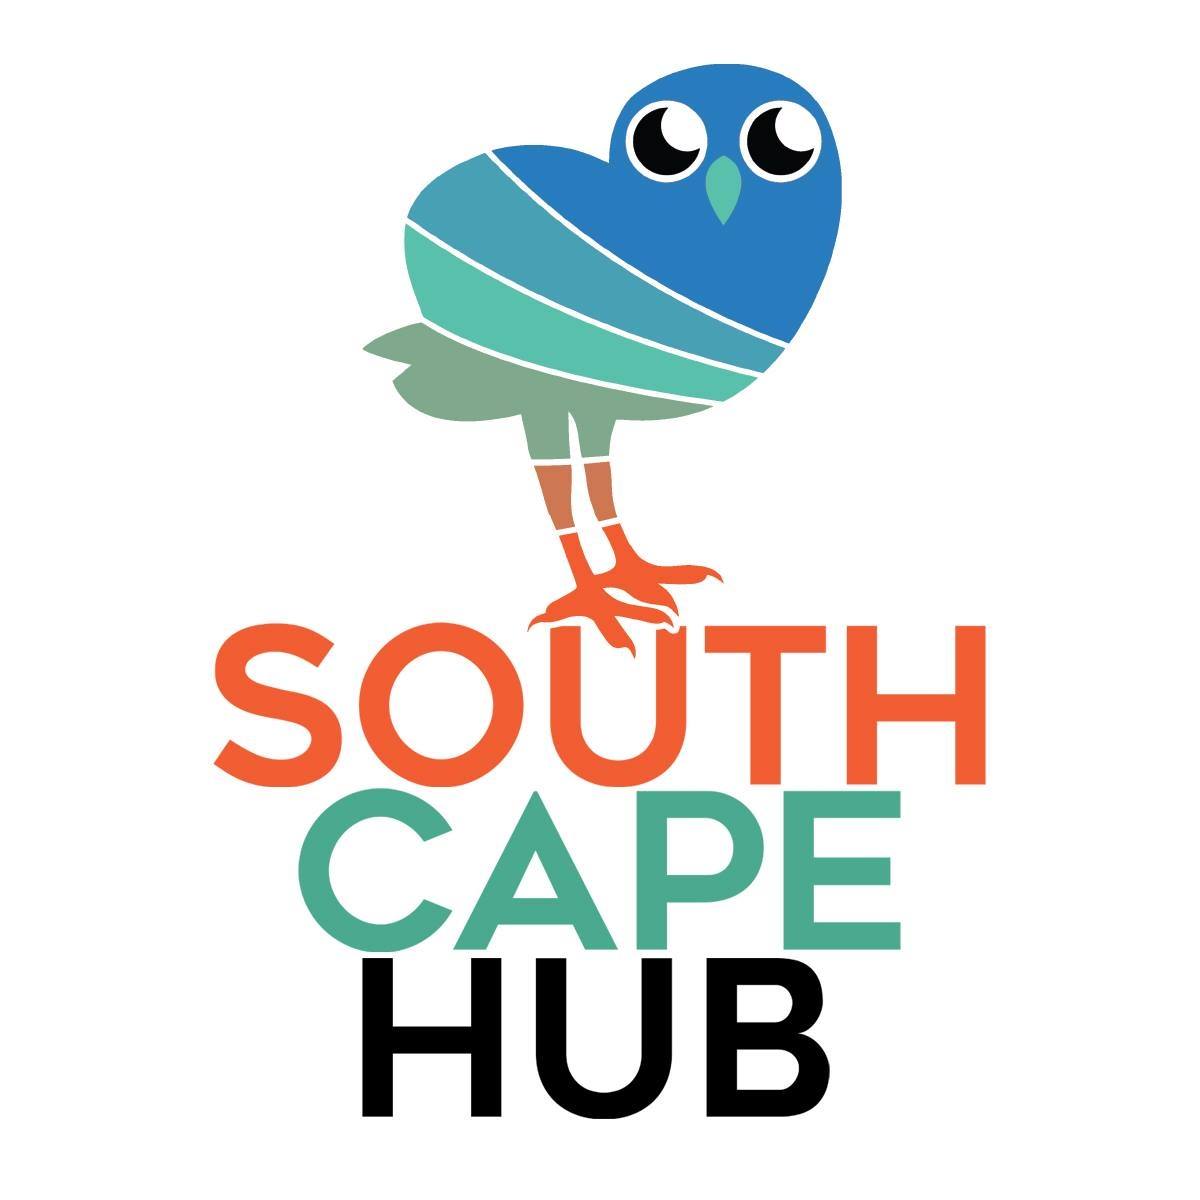 South Cape Hub profile pic featuring a burrowing owl